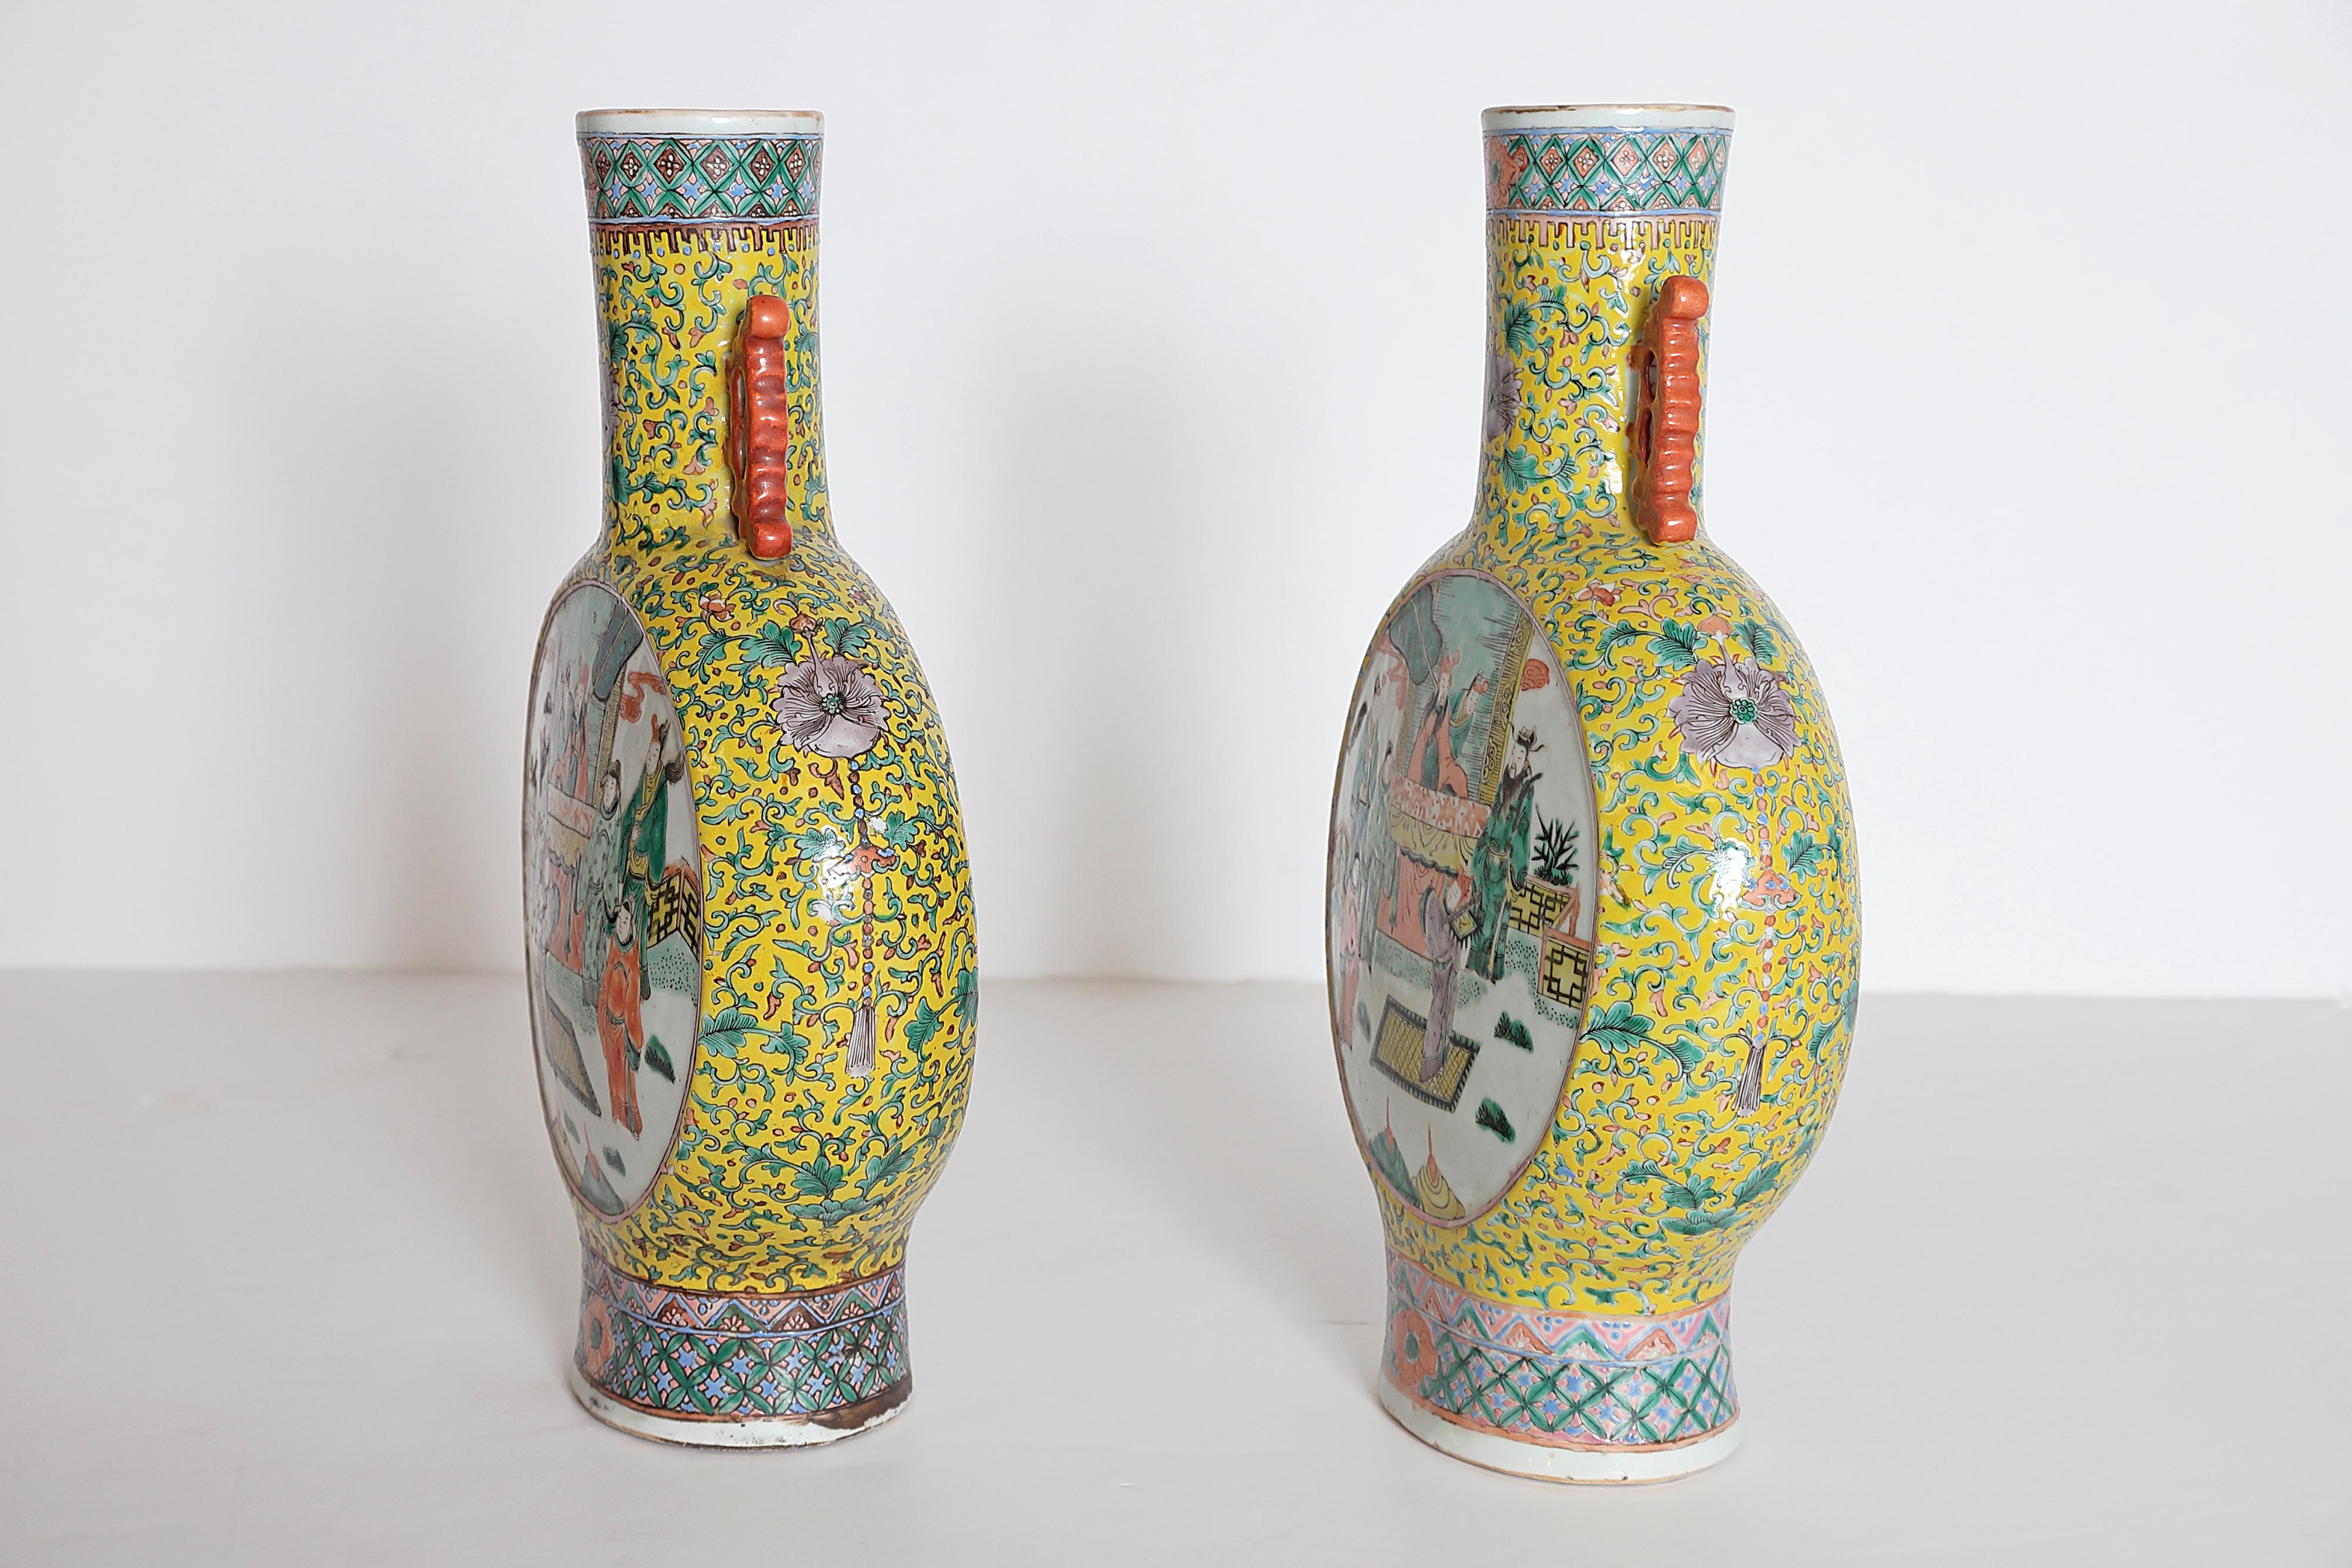 Two (2) Chinese porcelain moon flask vases, a true pair, yellow ground with green and pink flowering vine design with purple flowers, white panels front and back with interior and exterior / landscape scenes, including people and horses (each the